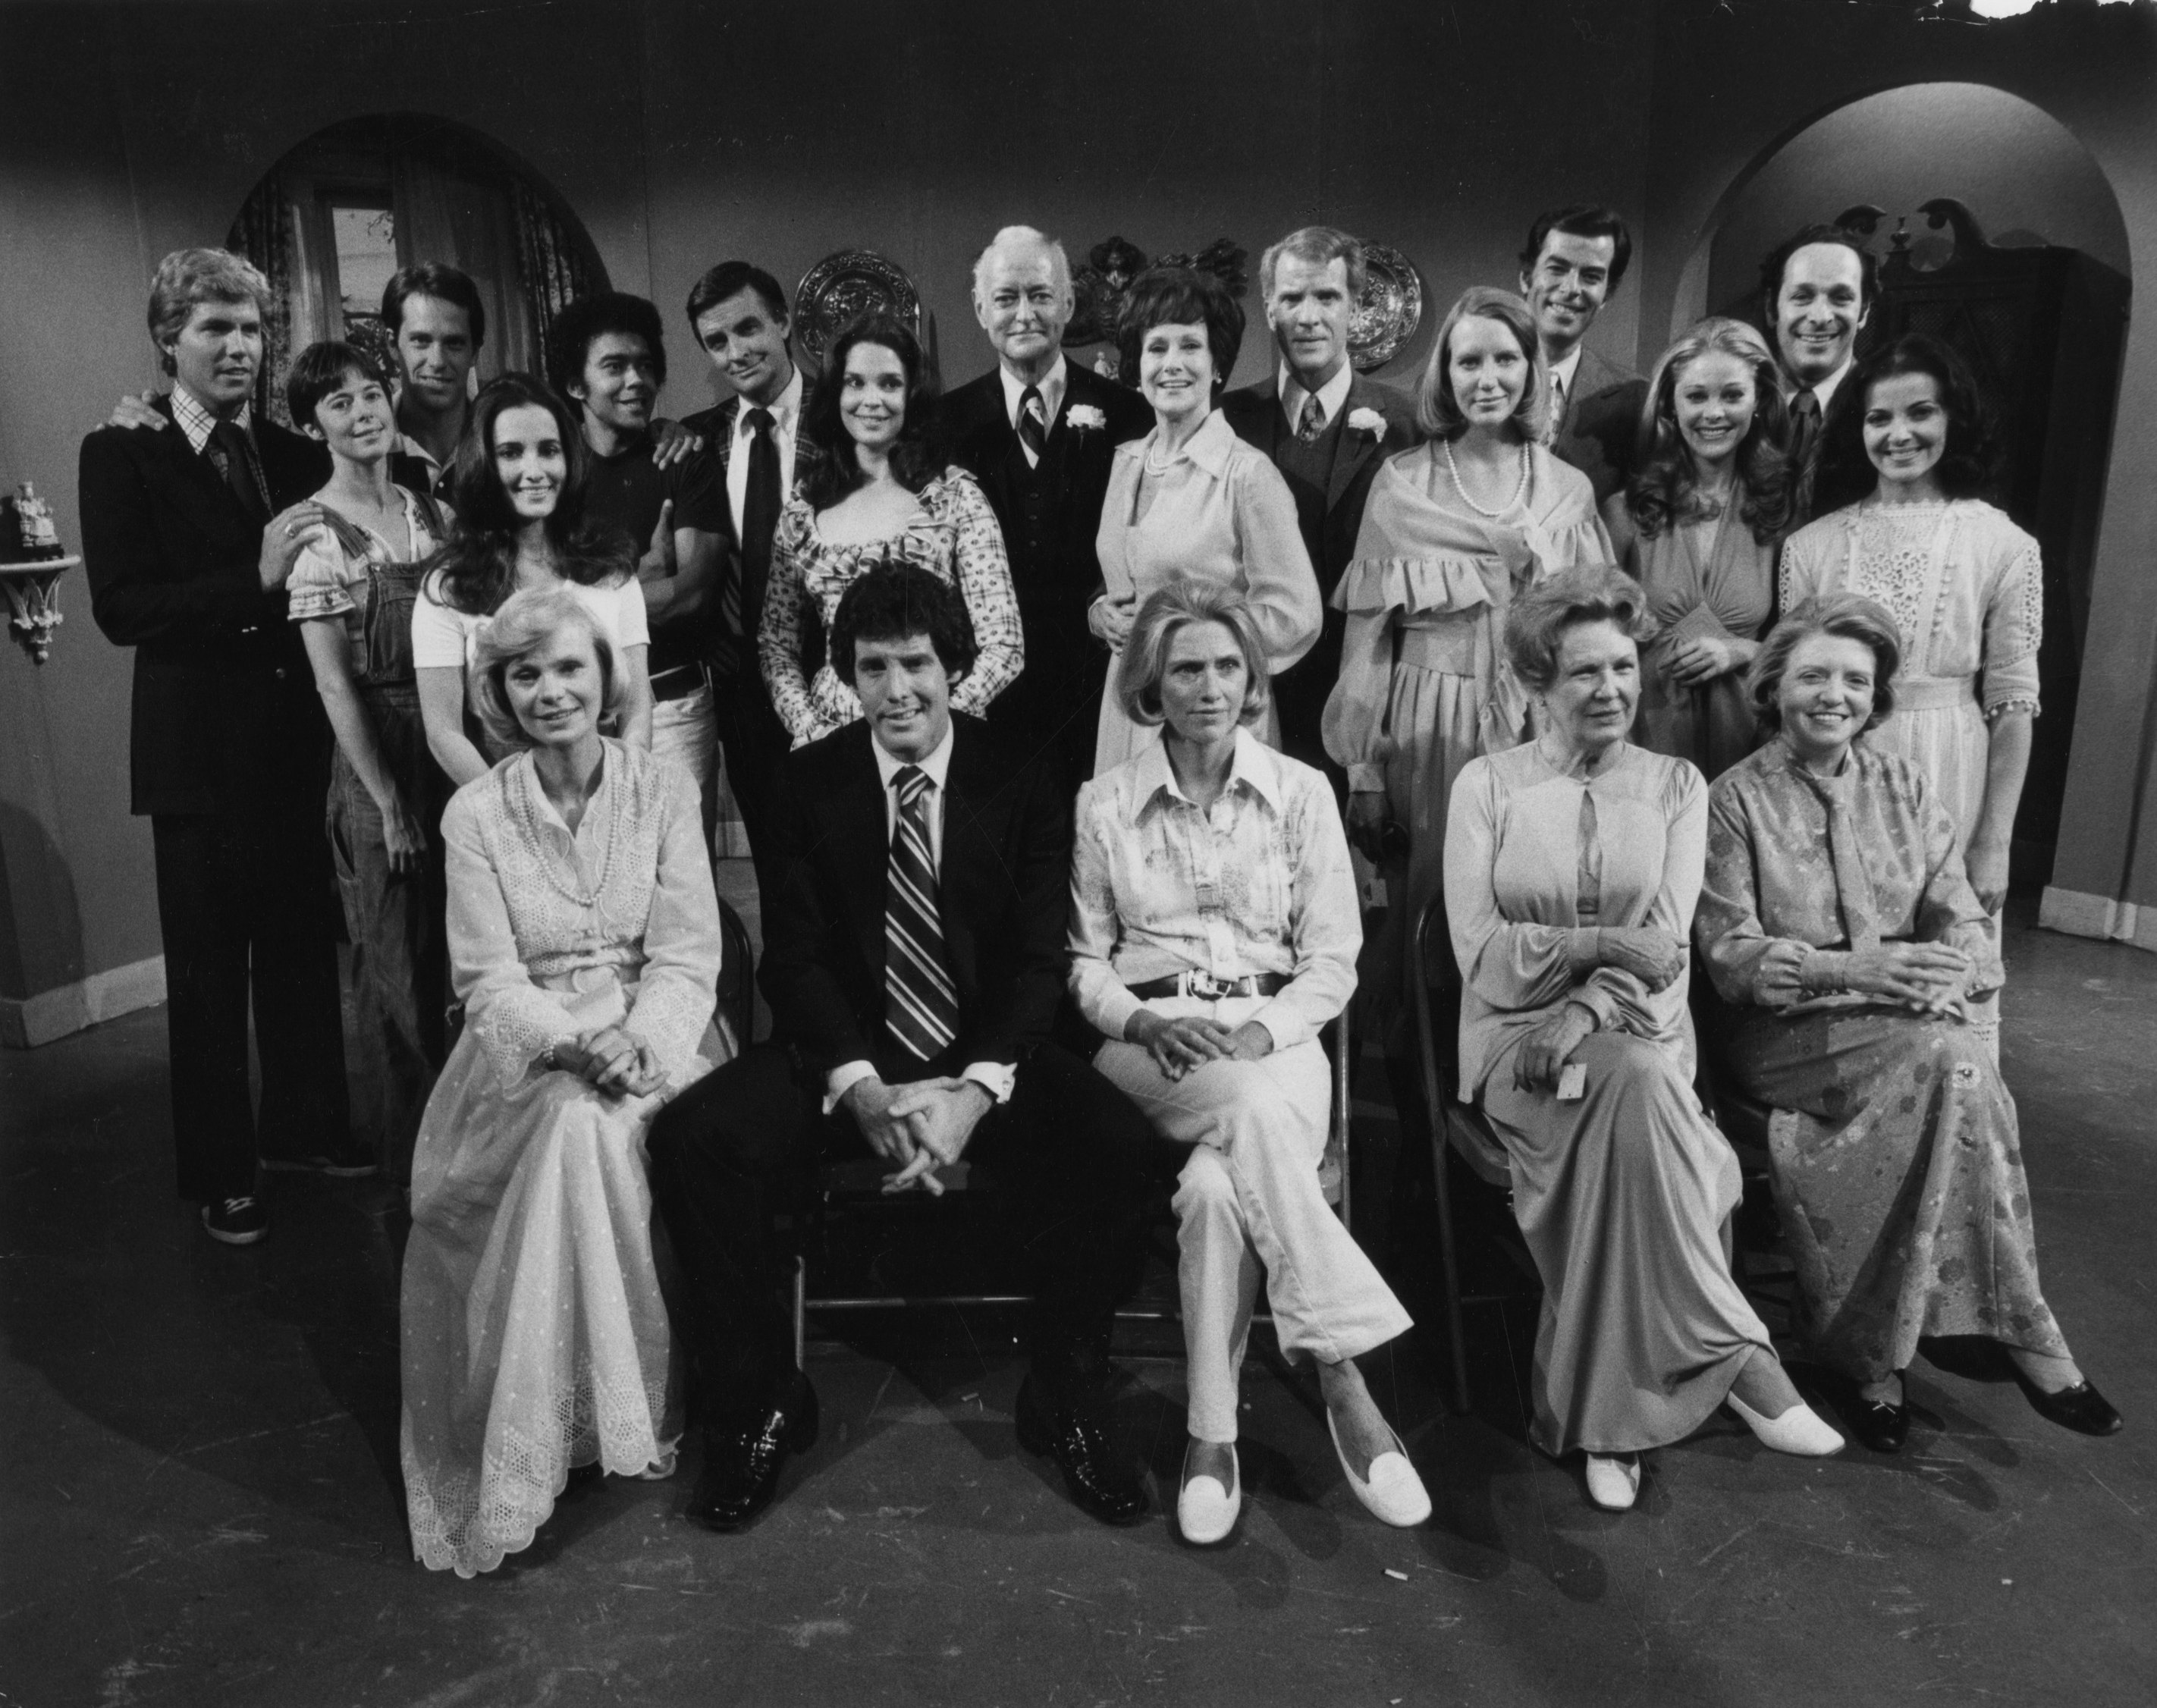 The cast of "All My Children" circa 1975. | Source: Getty Images